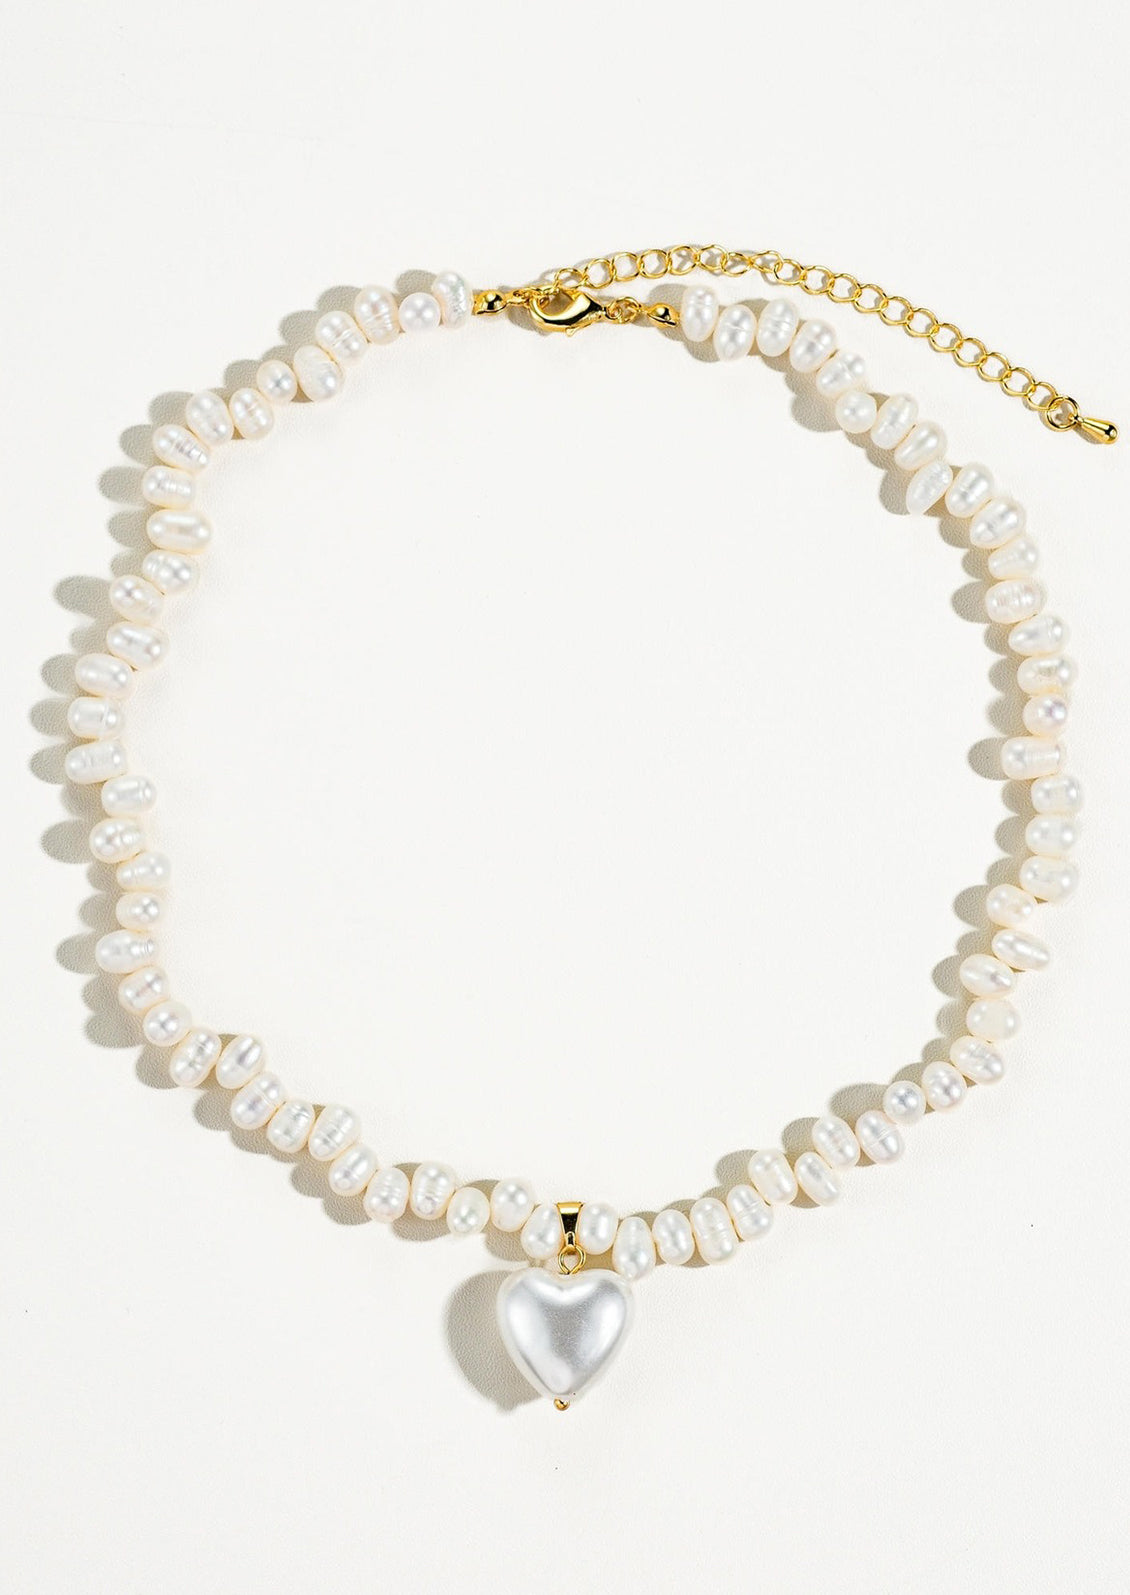 A white baroque pearl necklace with white pearlized heart shaped charm.